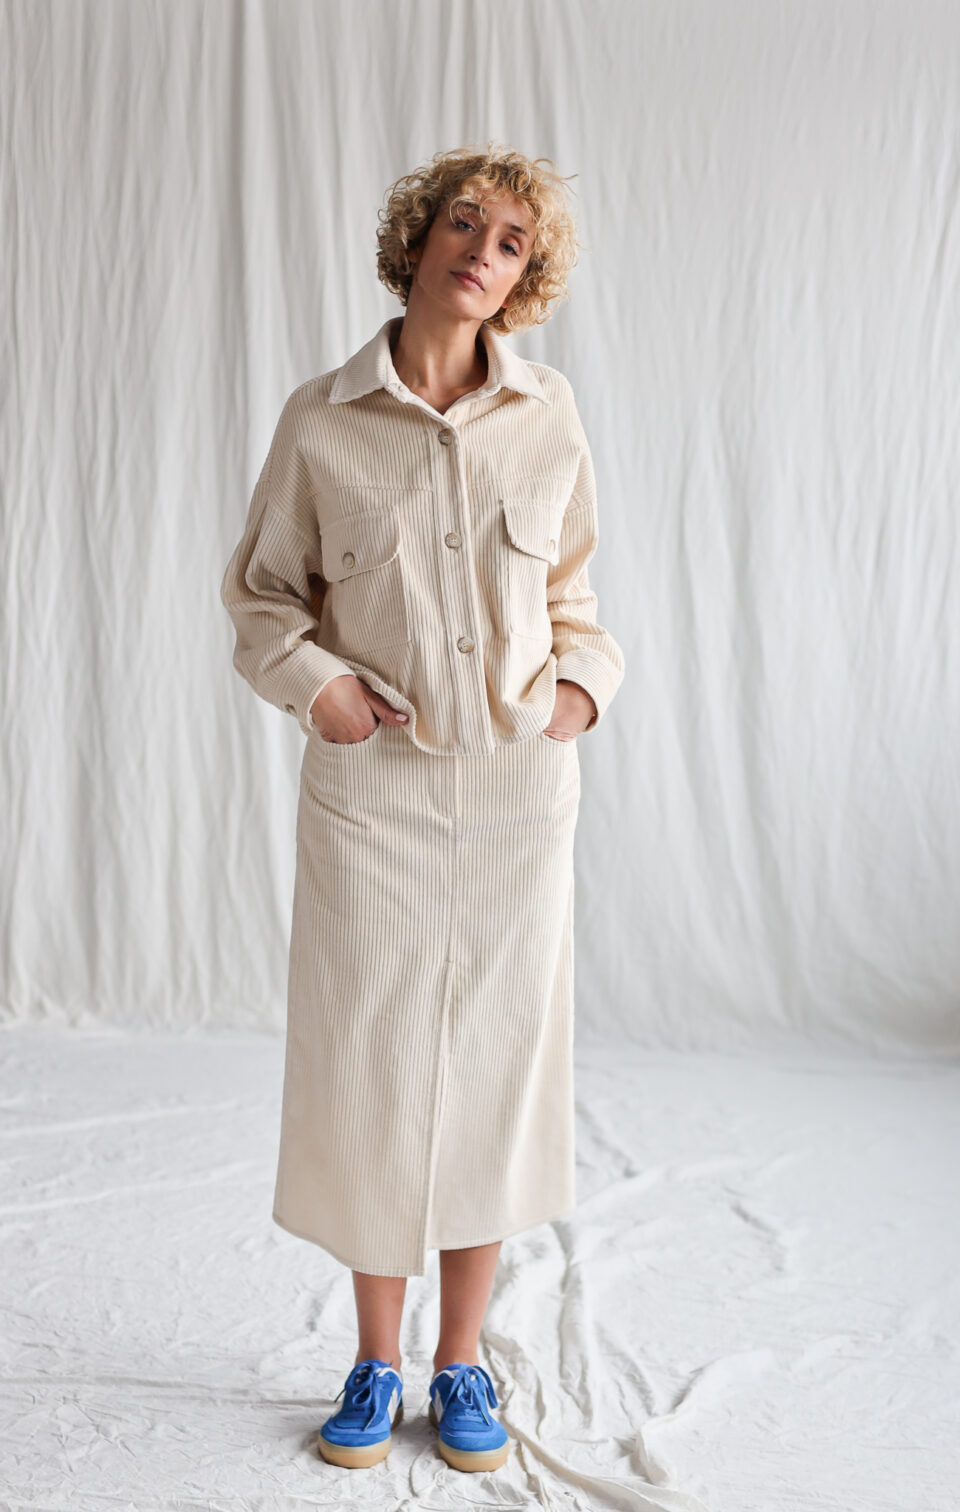 Wide cord oversized jacket in ivory color | Jacket | Sustainable clothing | OffOn clothing